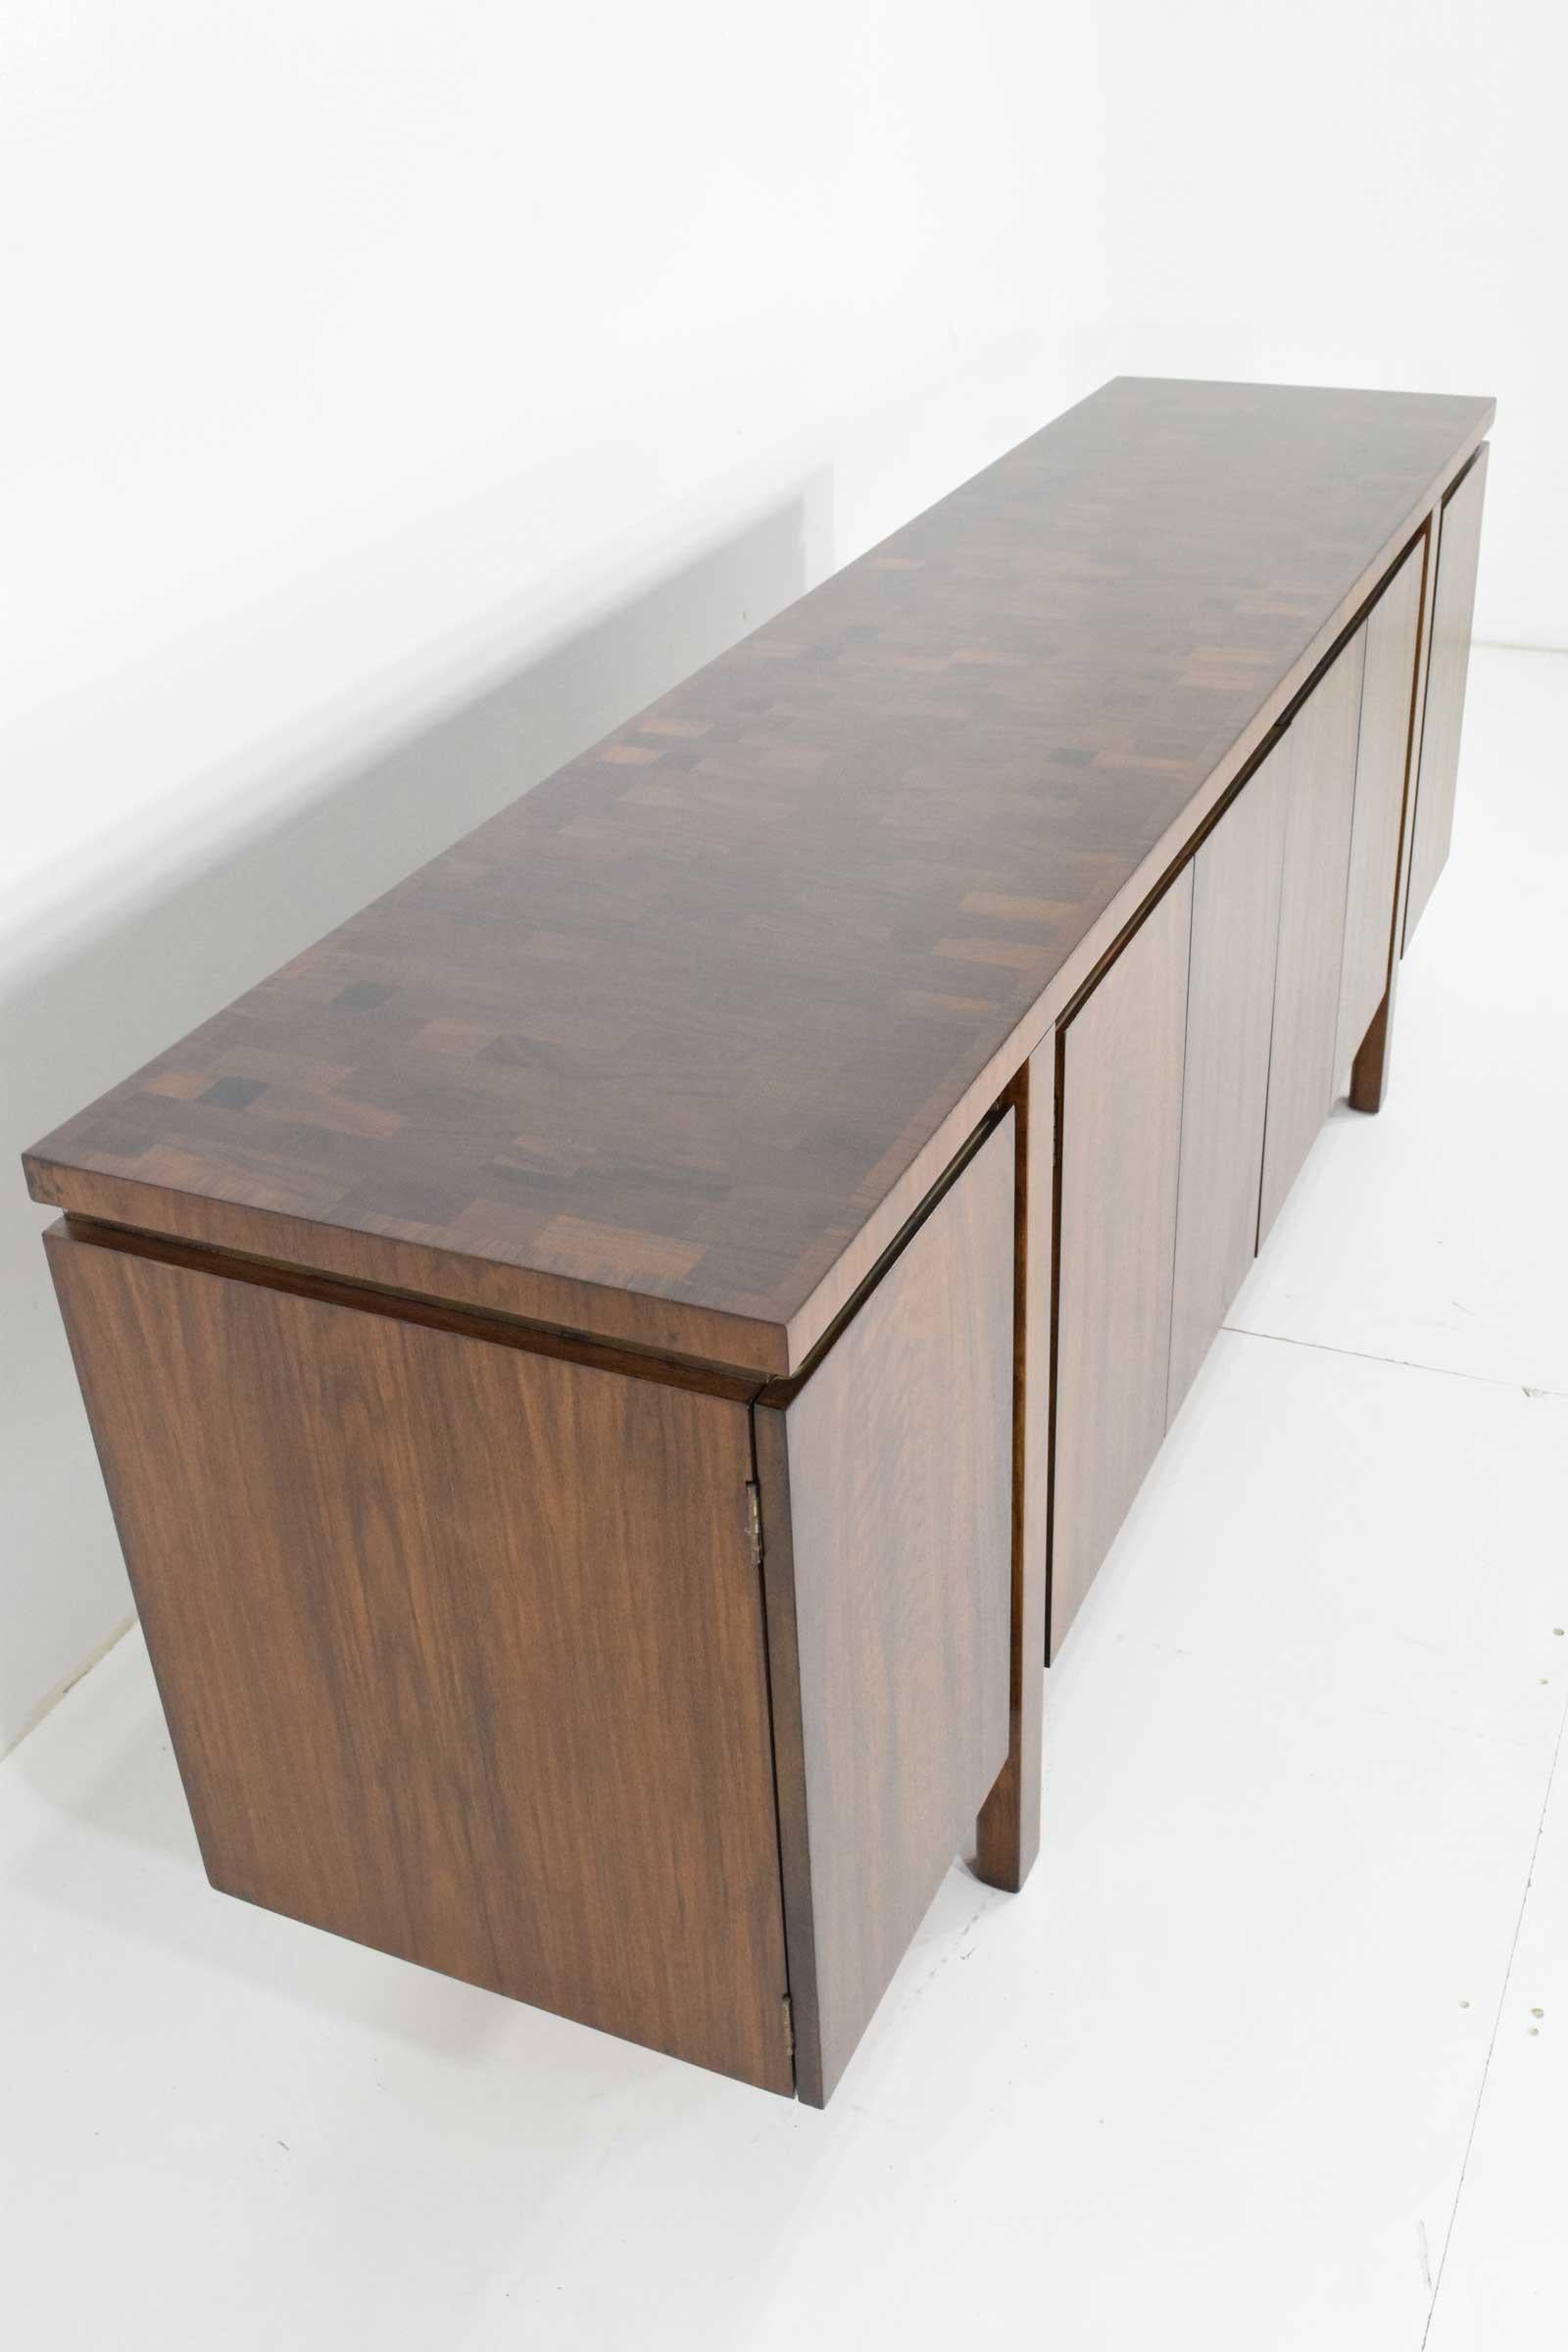 Mid-Century Modern Widdicomb Credenza or Sideboard in Walnut with Parquet Patterned Top